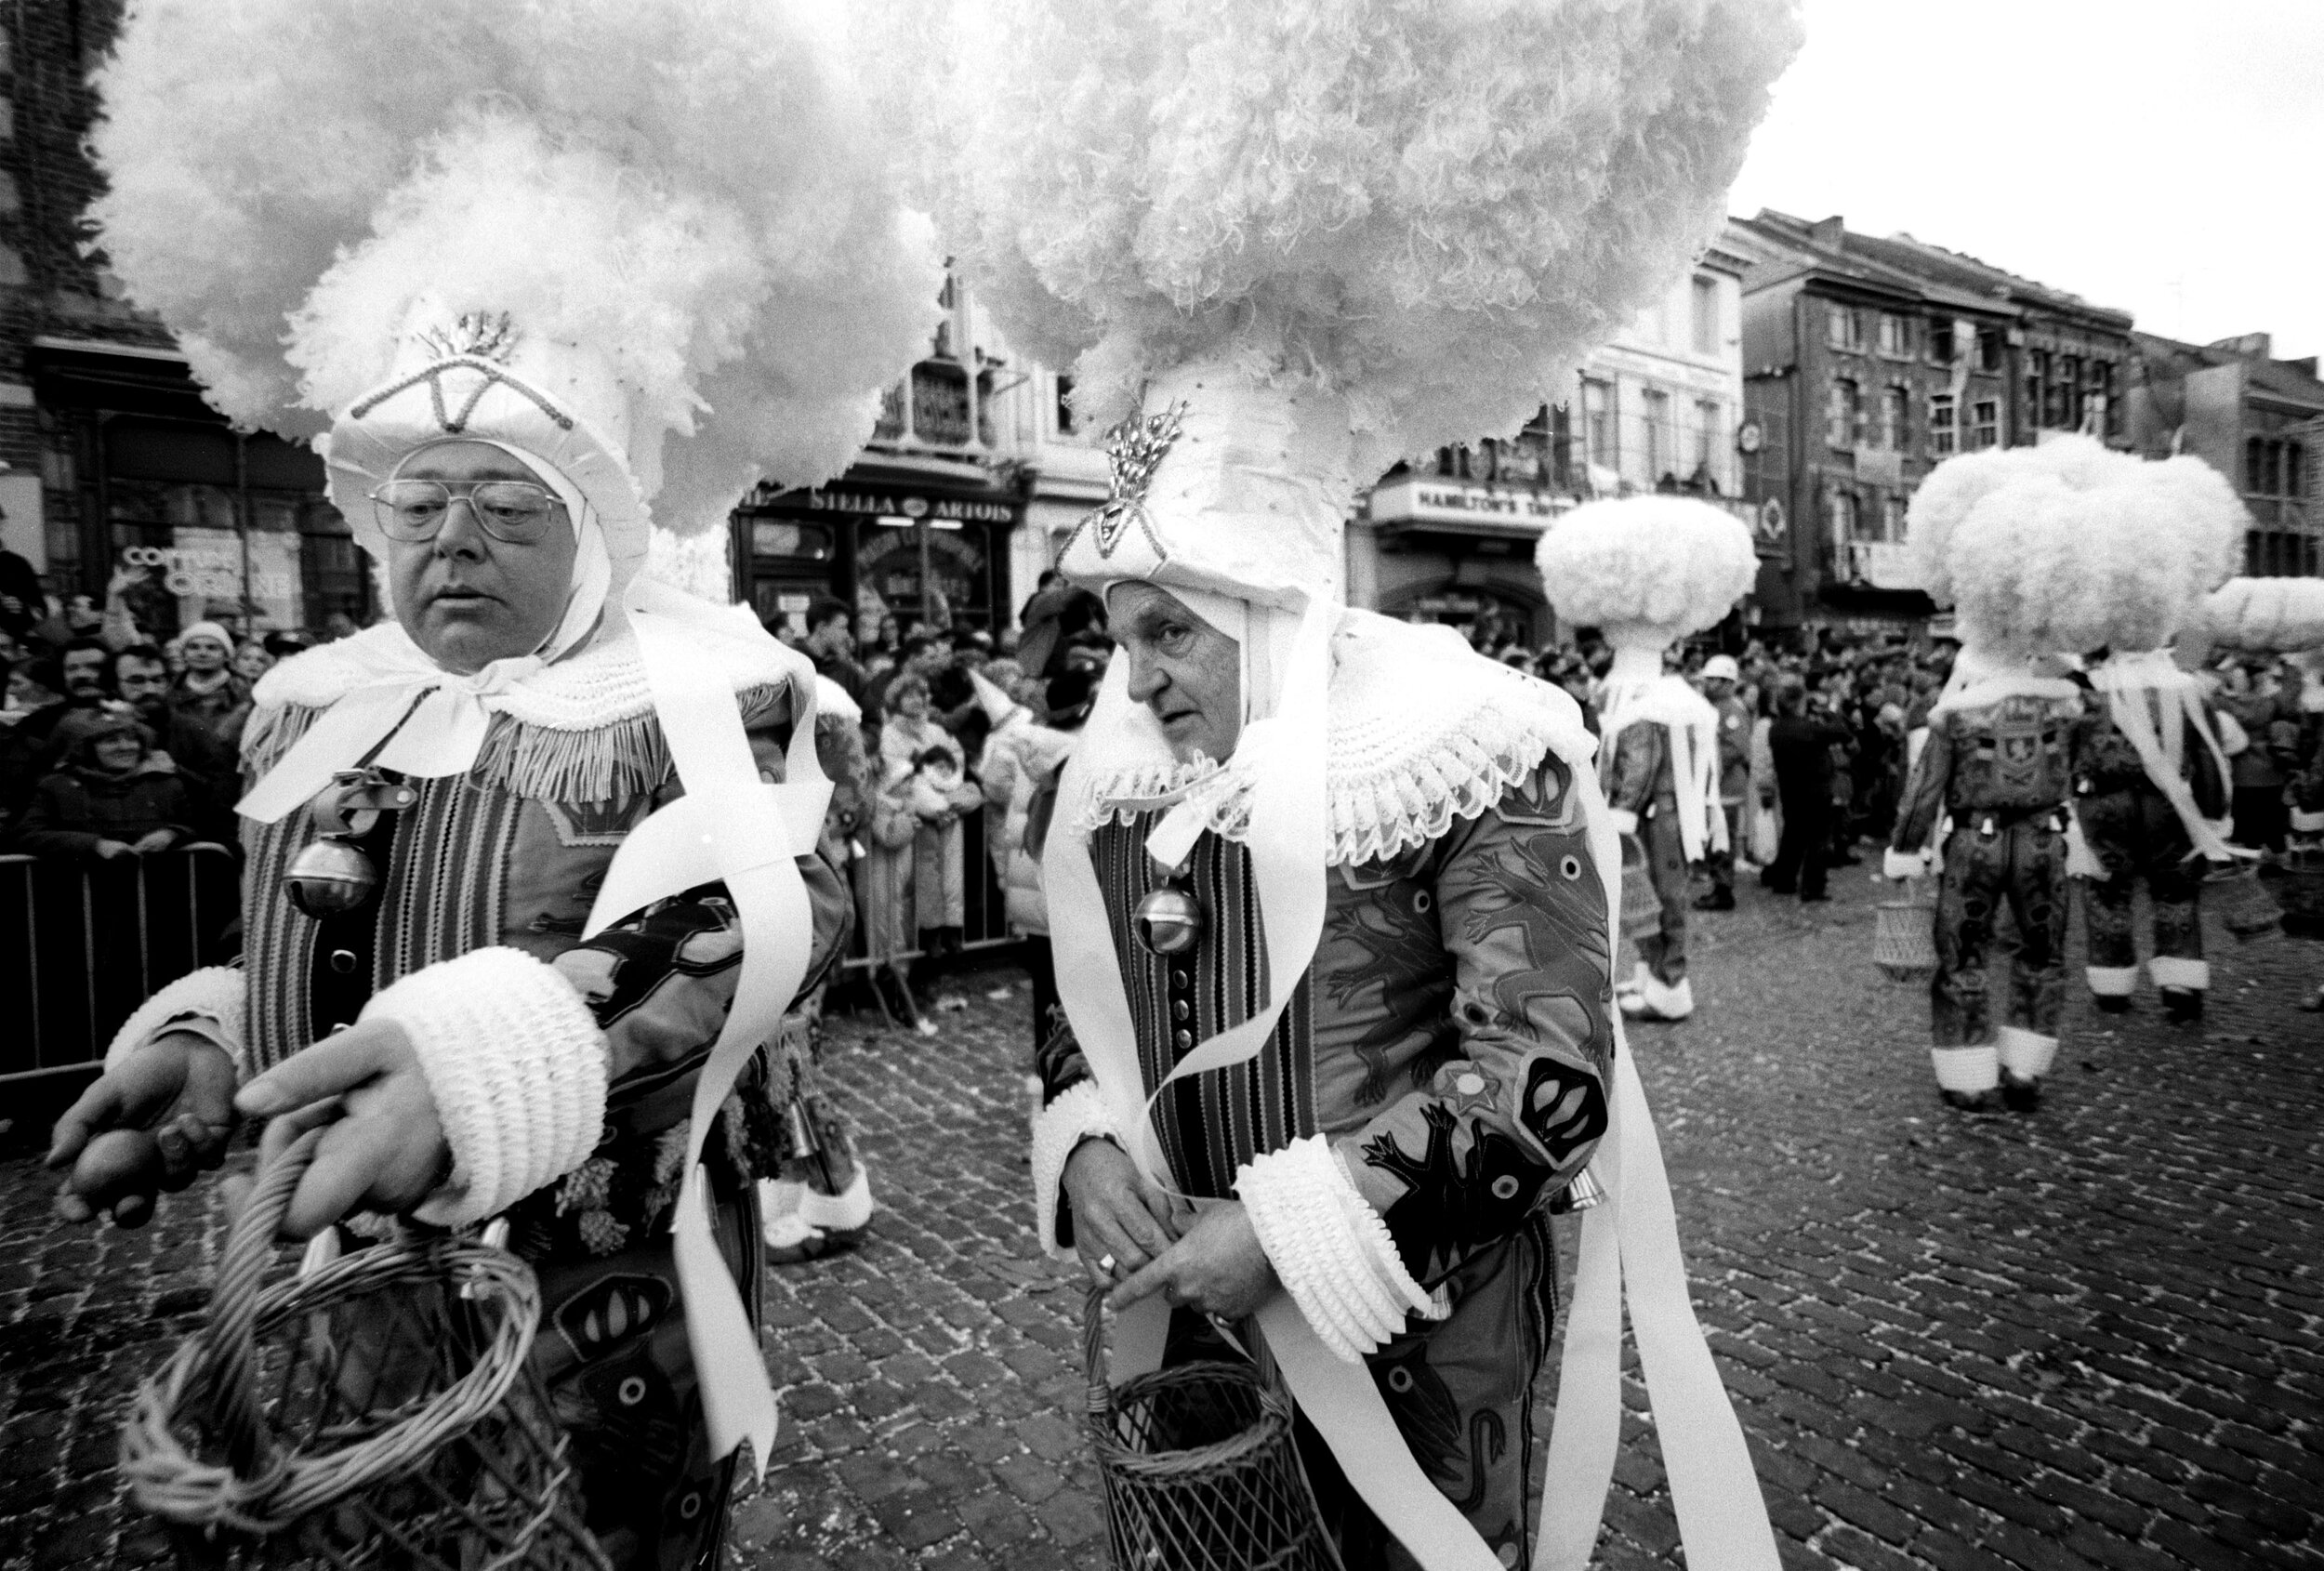  The Gilles of Binche.  During the Shrove Tuesday’s afternoon procession in the city of Binche, the Gille wears his ostrich feathers hat and trows oranges 